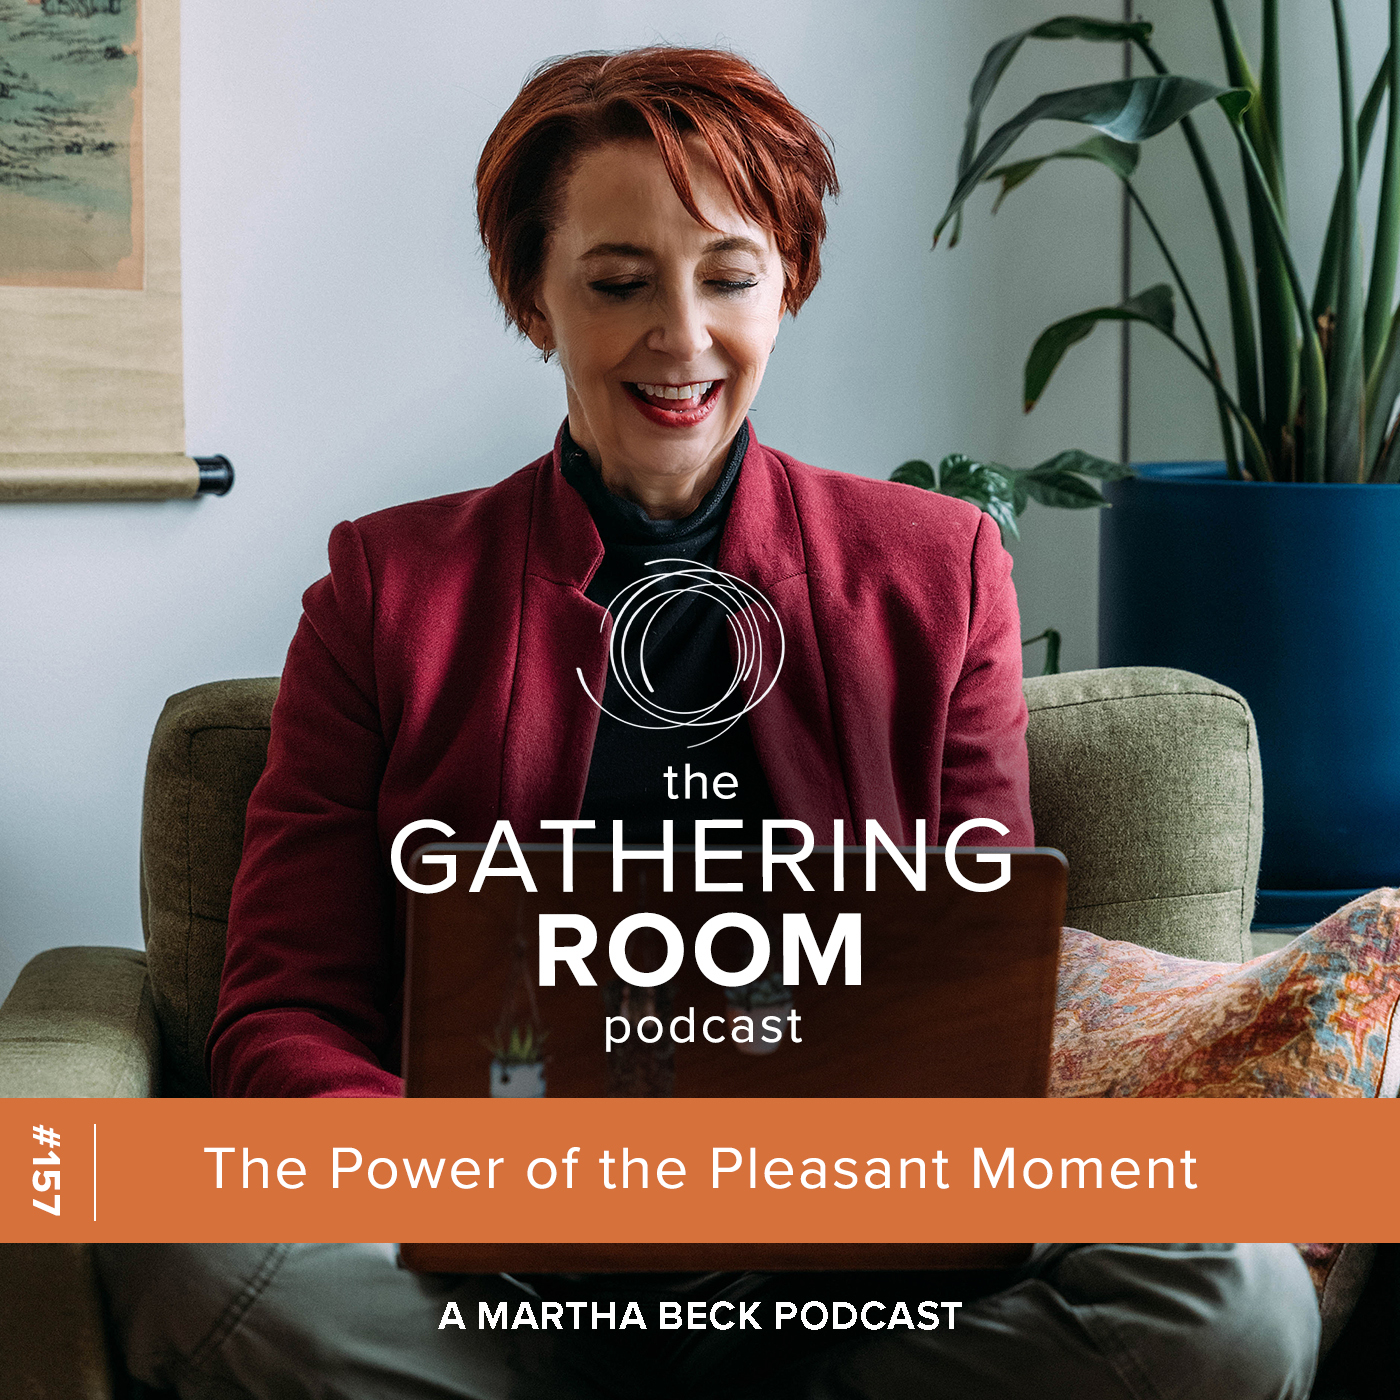 Image for The Gathering Pod A Martha Beck Podcast Episode #157 The Power of the Pleasant Moment